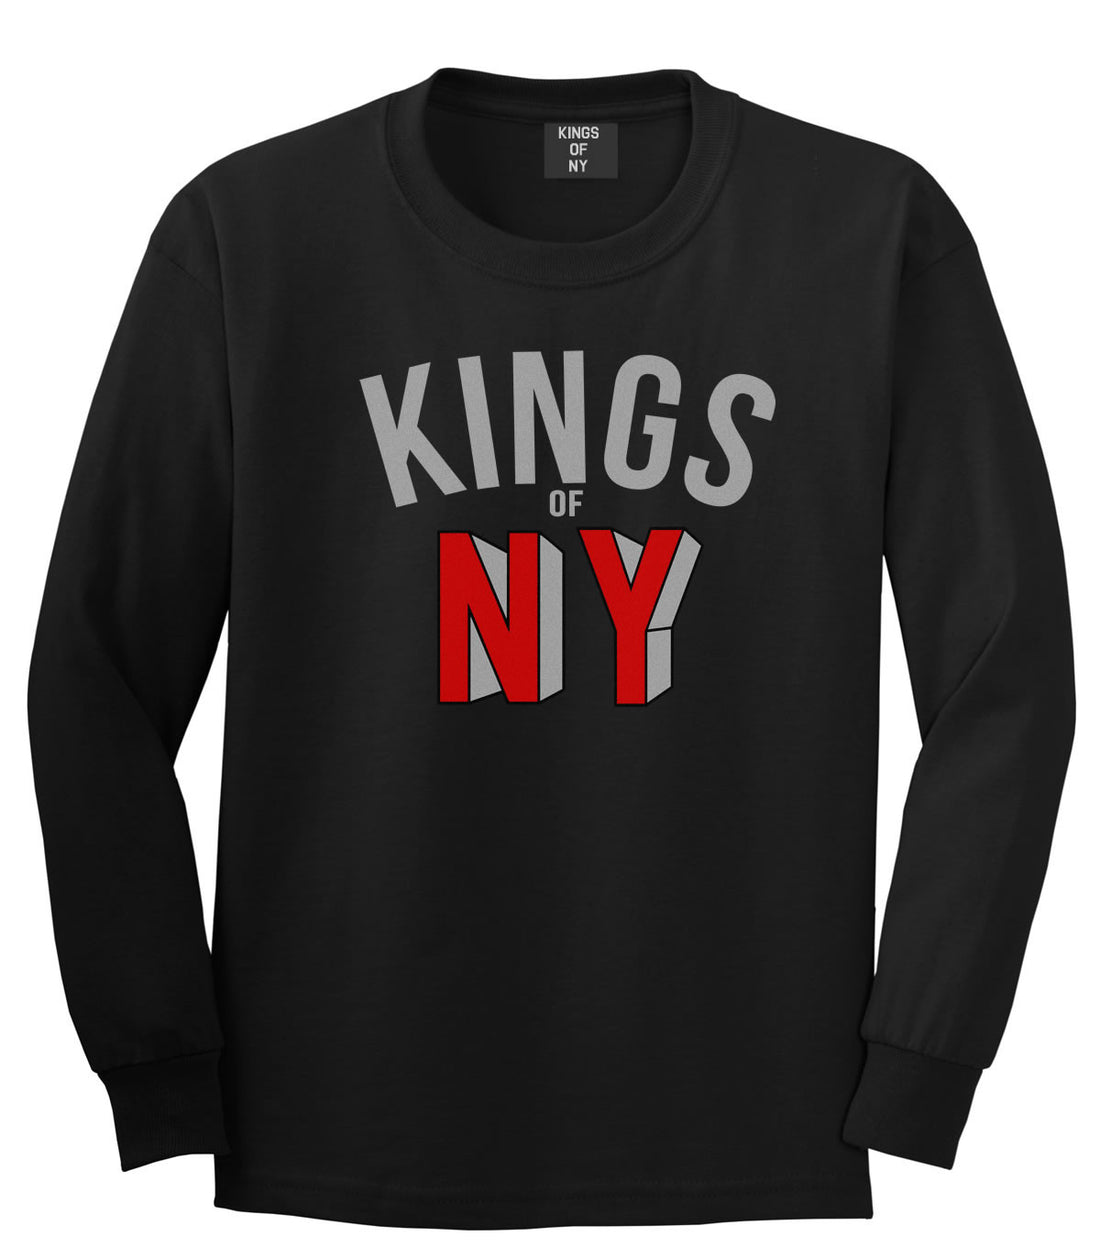 NY Red Block Letter Printed Long Sleeve T-Shirt in Black by Kings Of NY